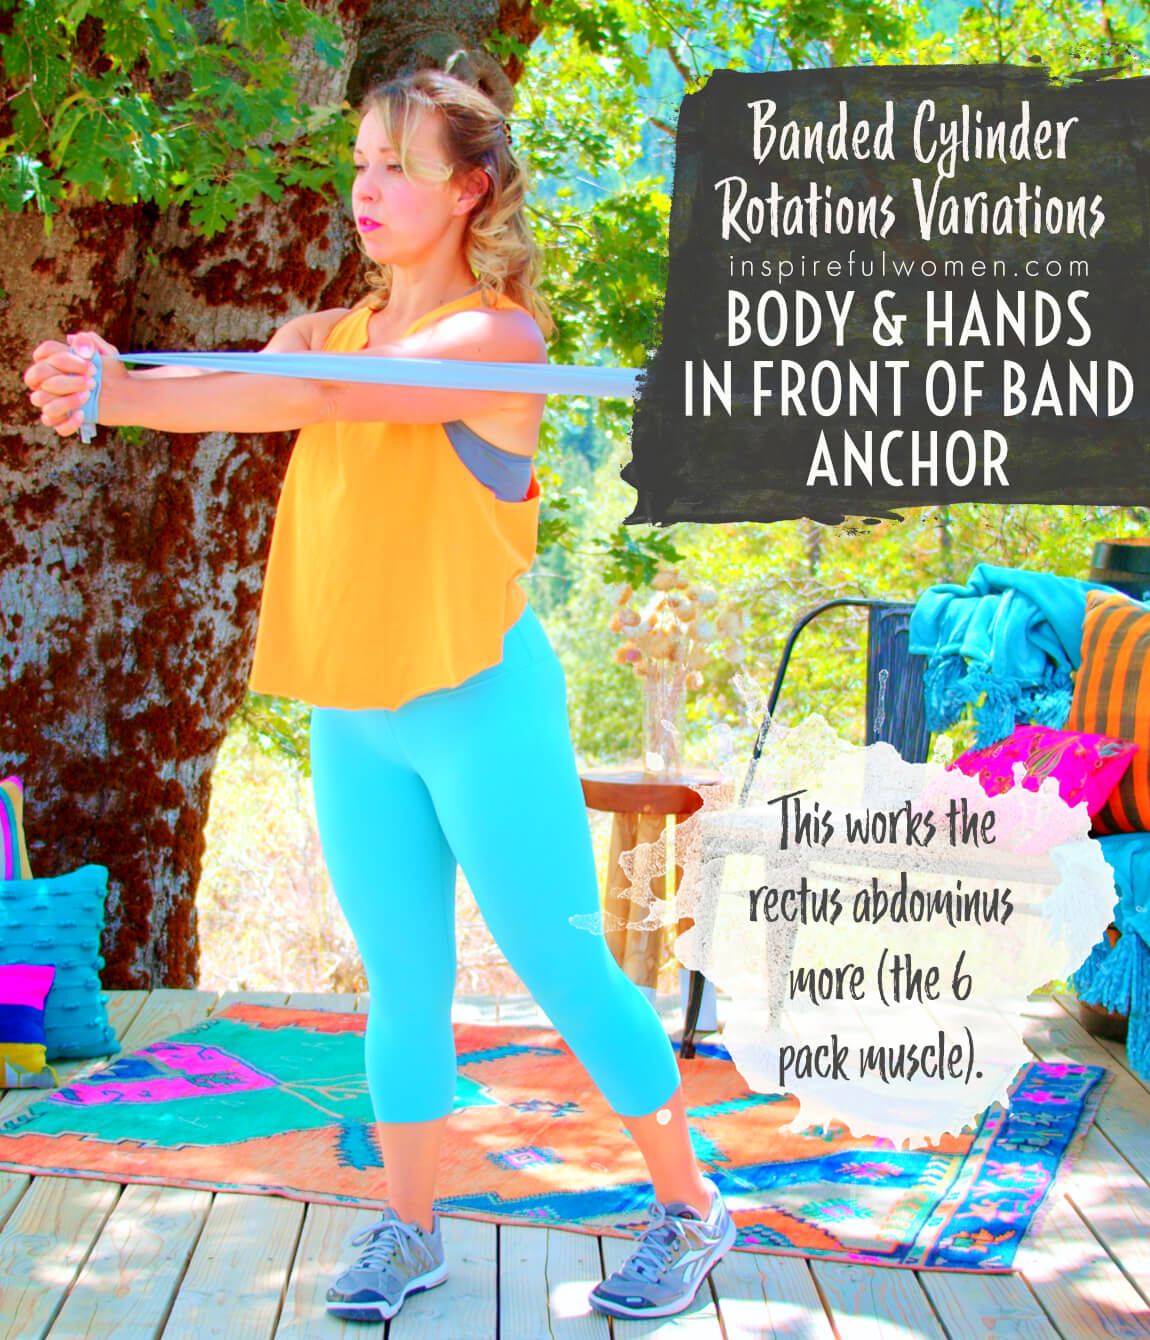 body-hands-front-of-band-anchor-banded-cylinder-rotations-core-exercise-variation